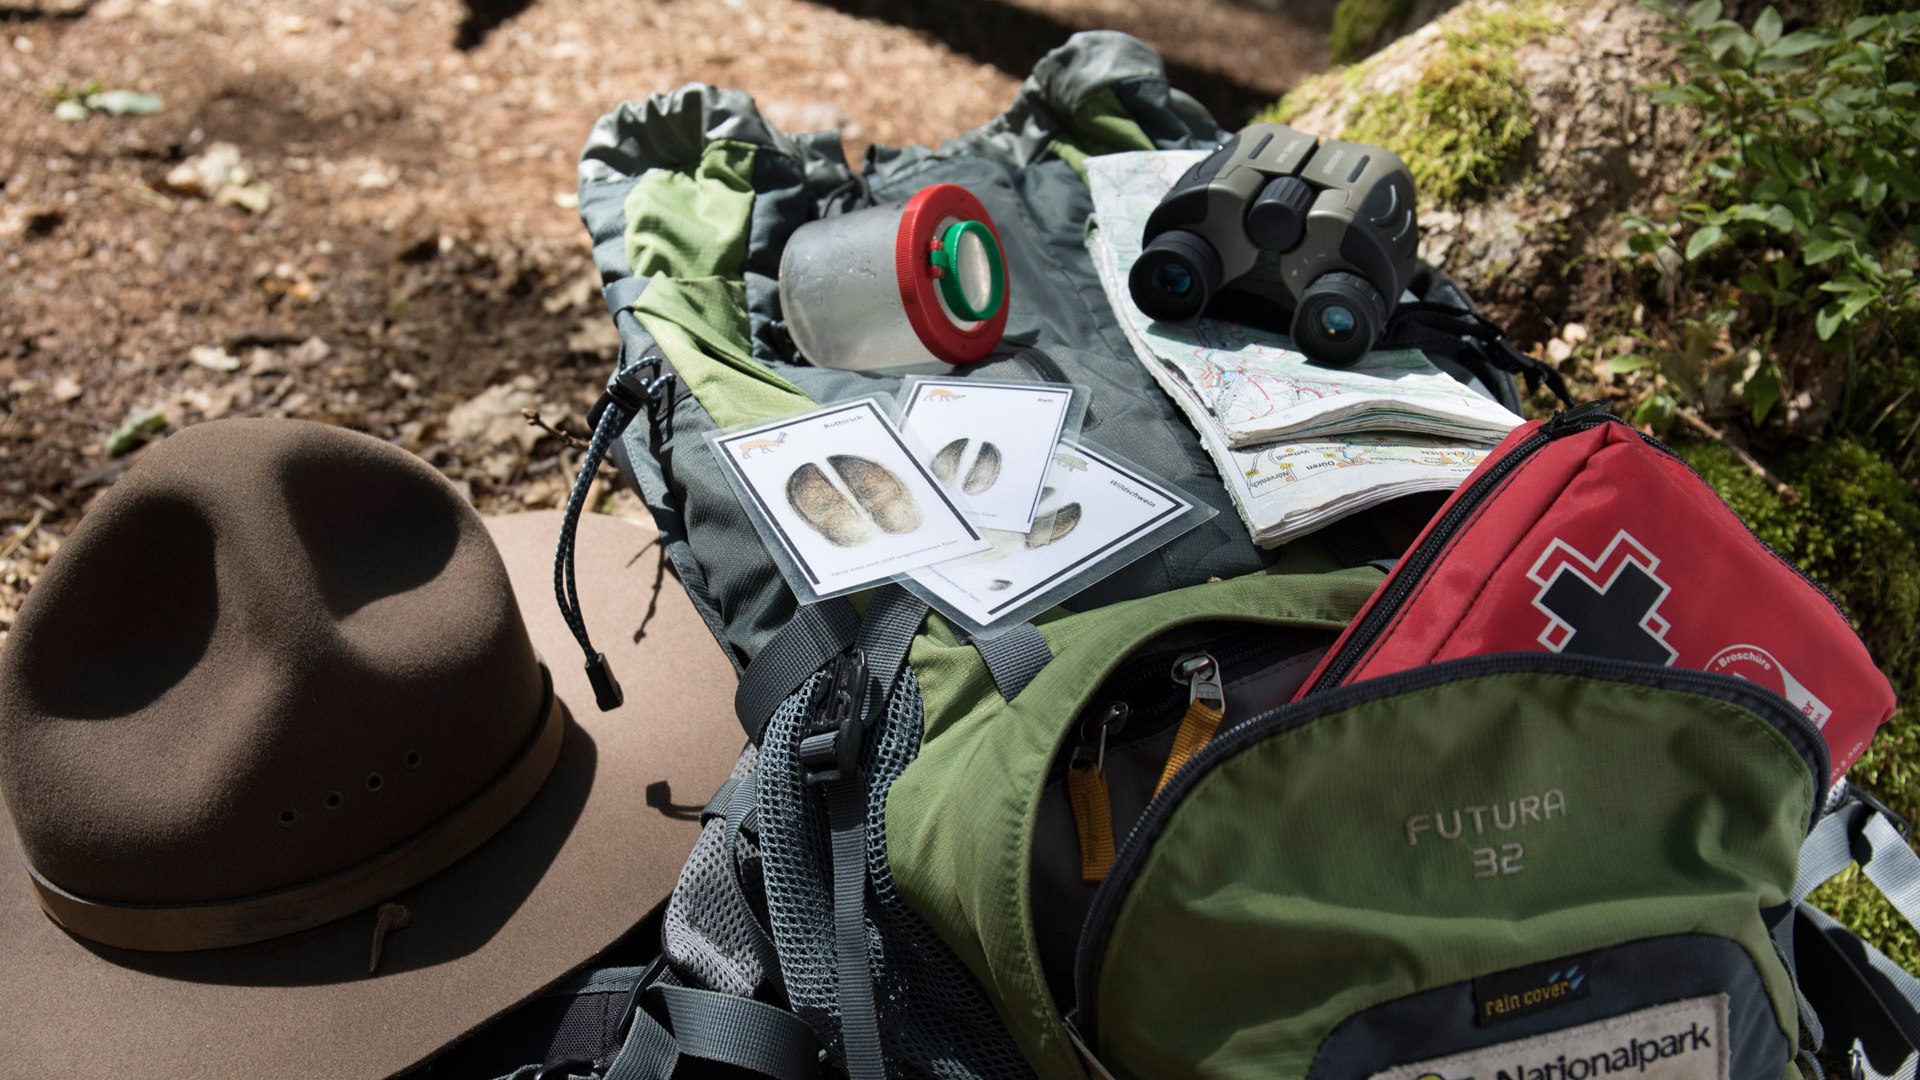 In Nina's &quot;survival pack&quot;: binoculars, a flint, a rope, blindfolds for the blind voyage of discovery through nature, a first aid kit and much more., © Ralph Sondermann, Tourismus NRW e.V.